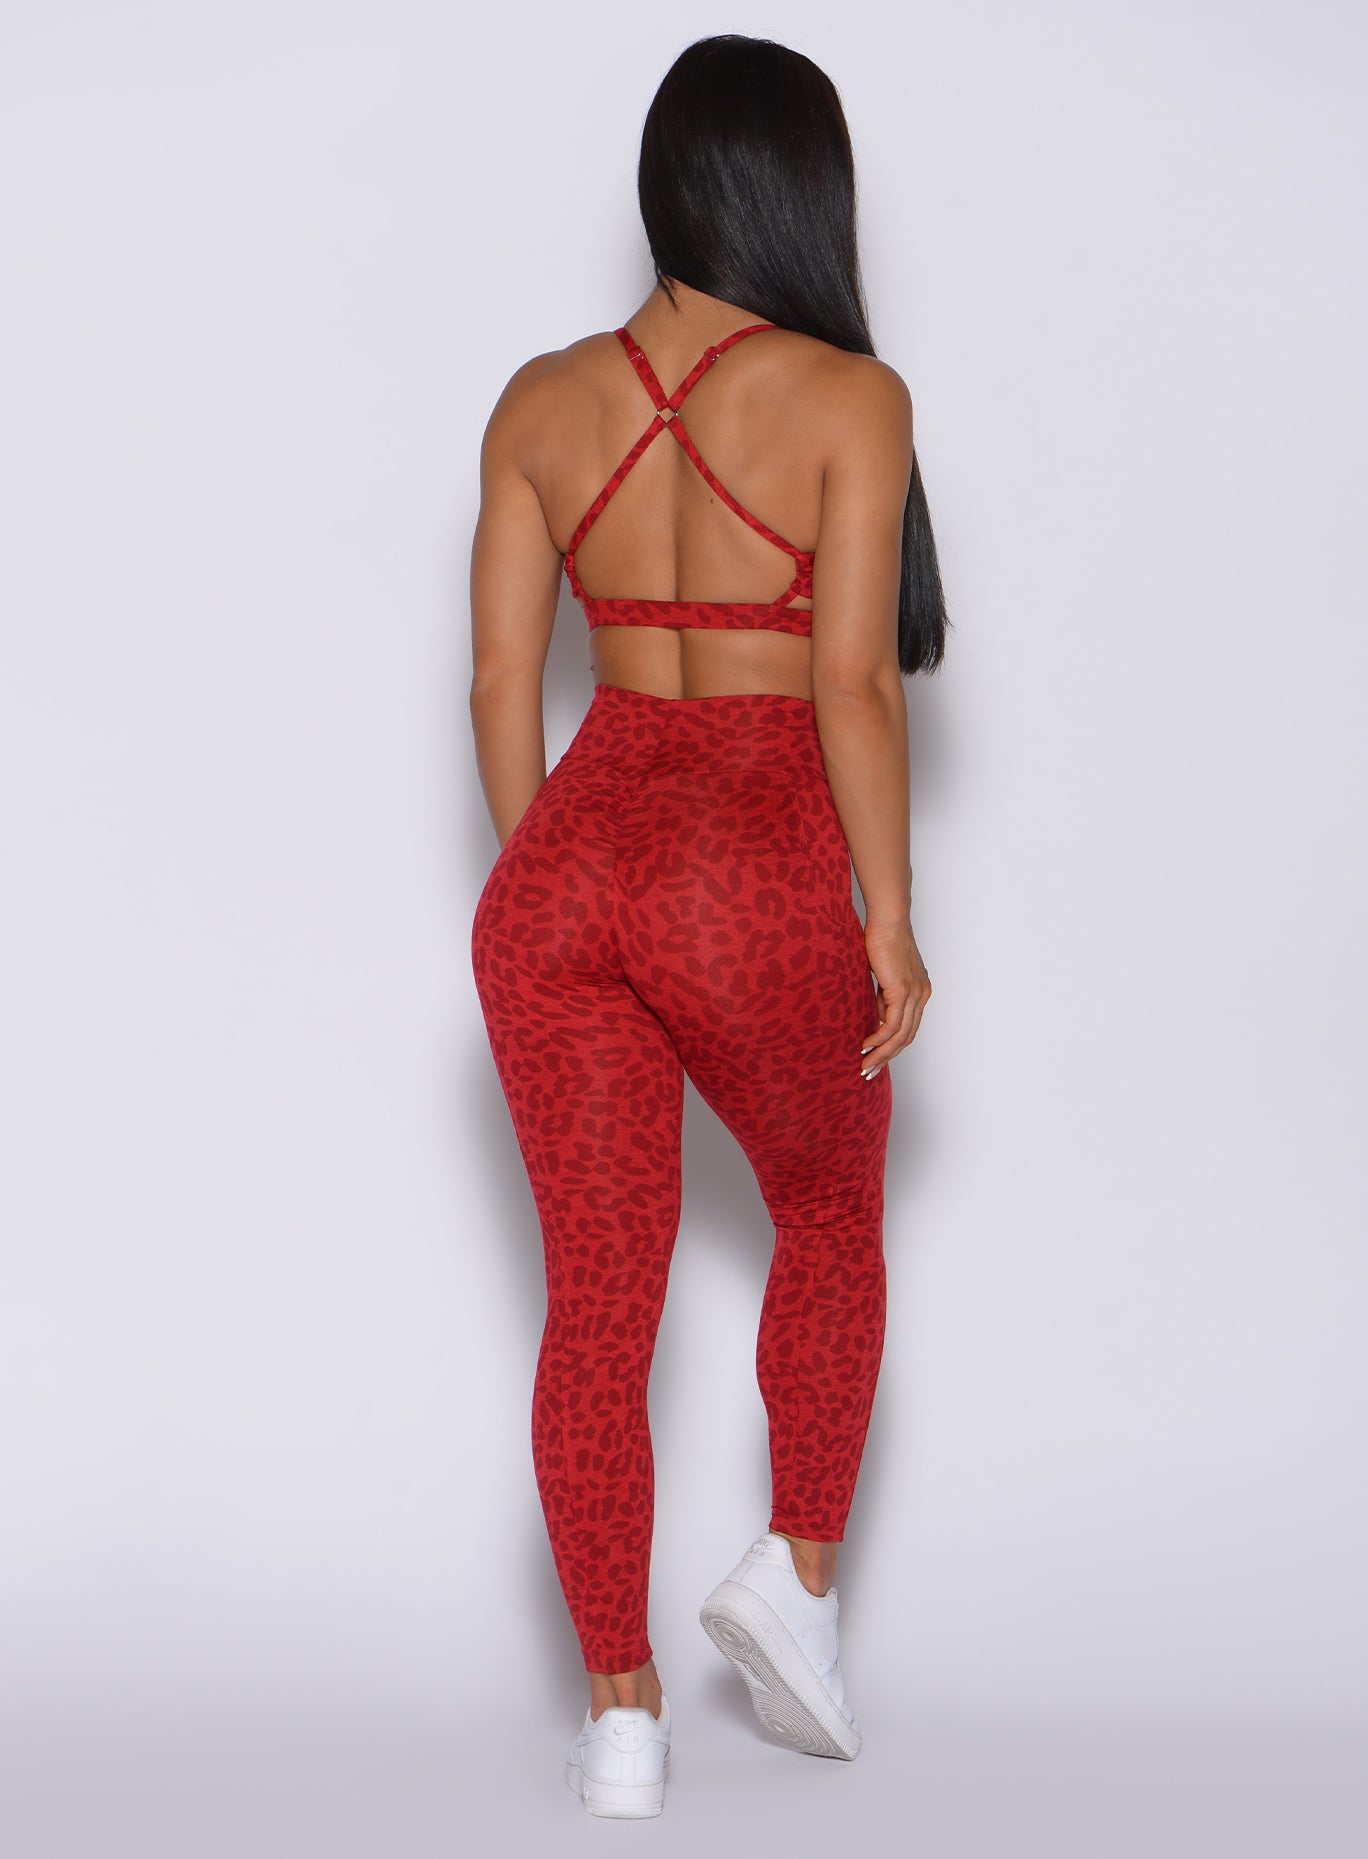 Back profile view of a model in our curves leggings in red cheetah color and a matching bra